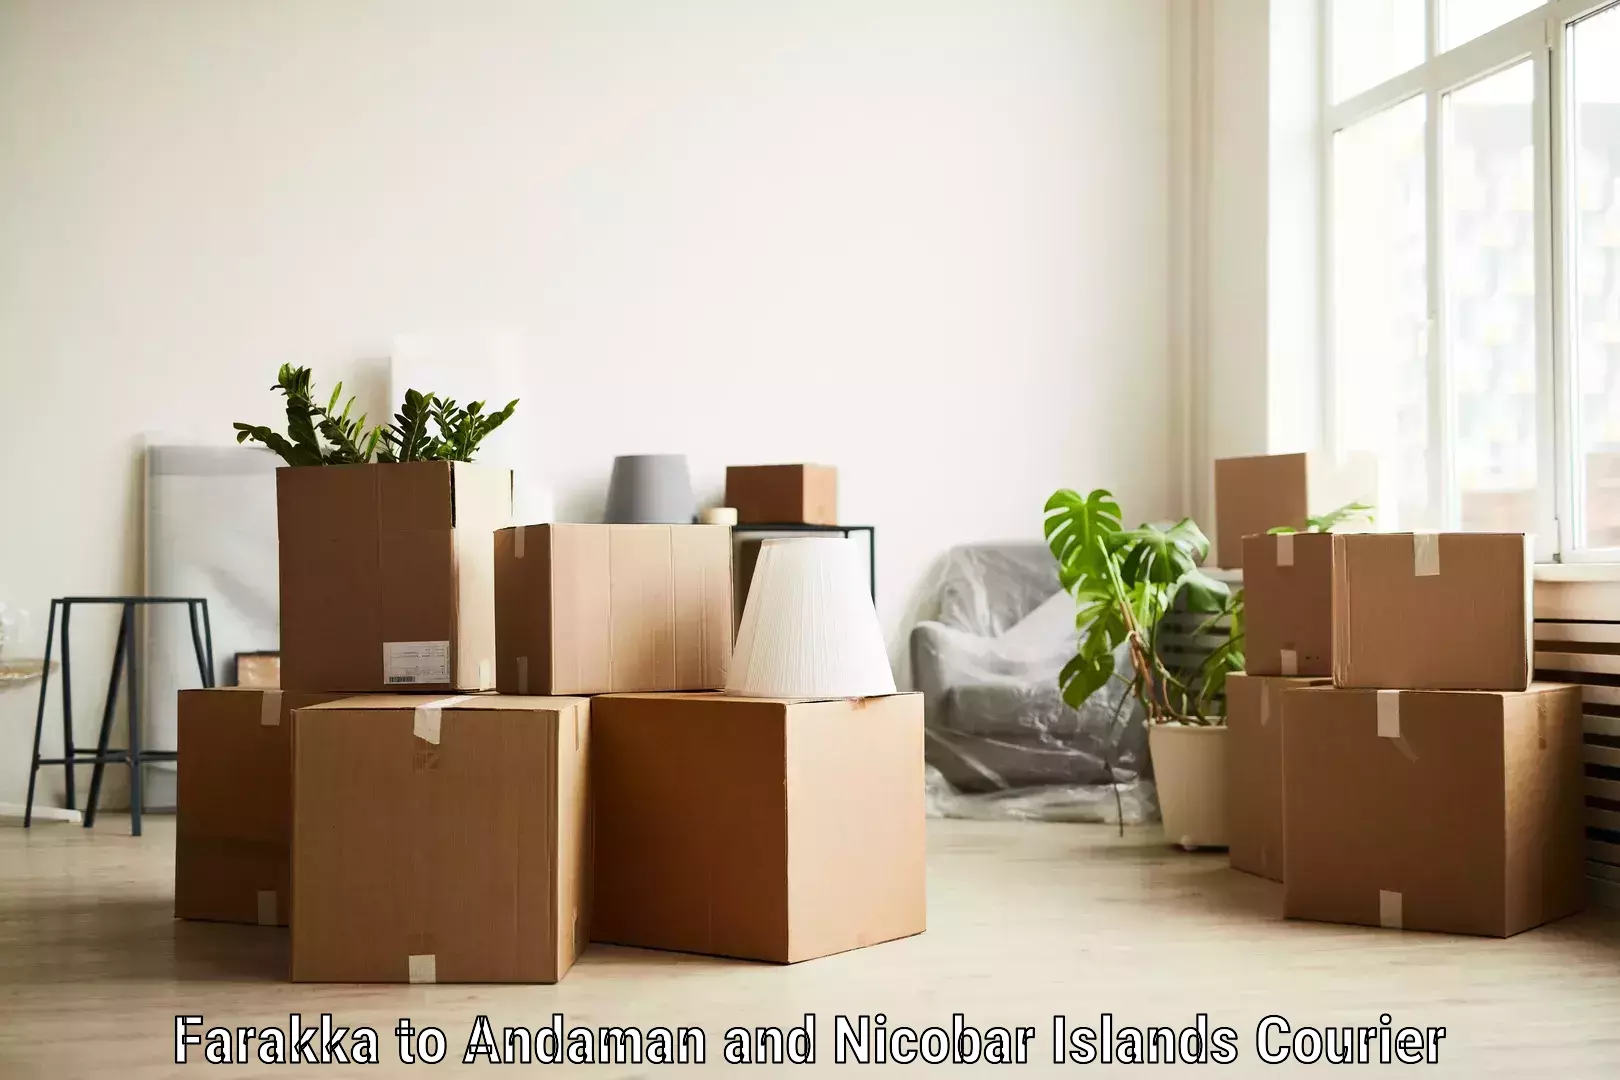 Professional courier services in Farakka to Andaman and Nicobar Islands